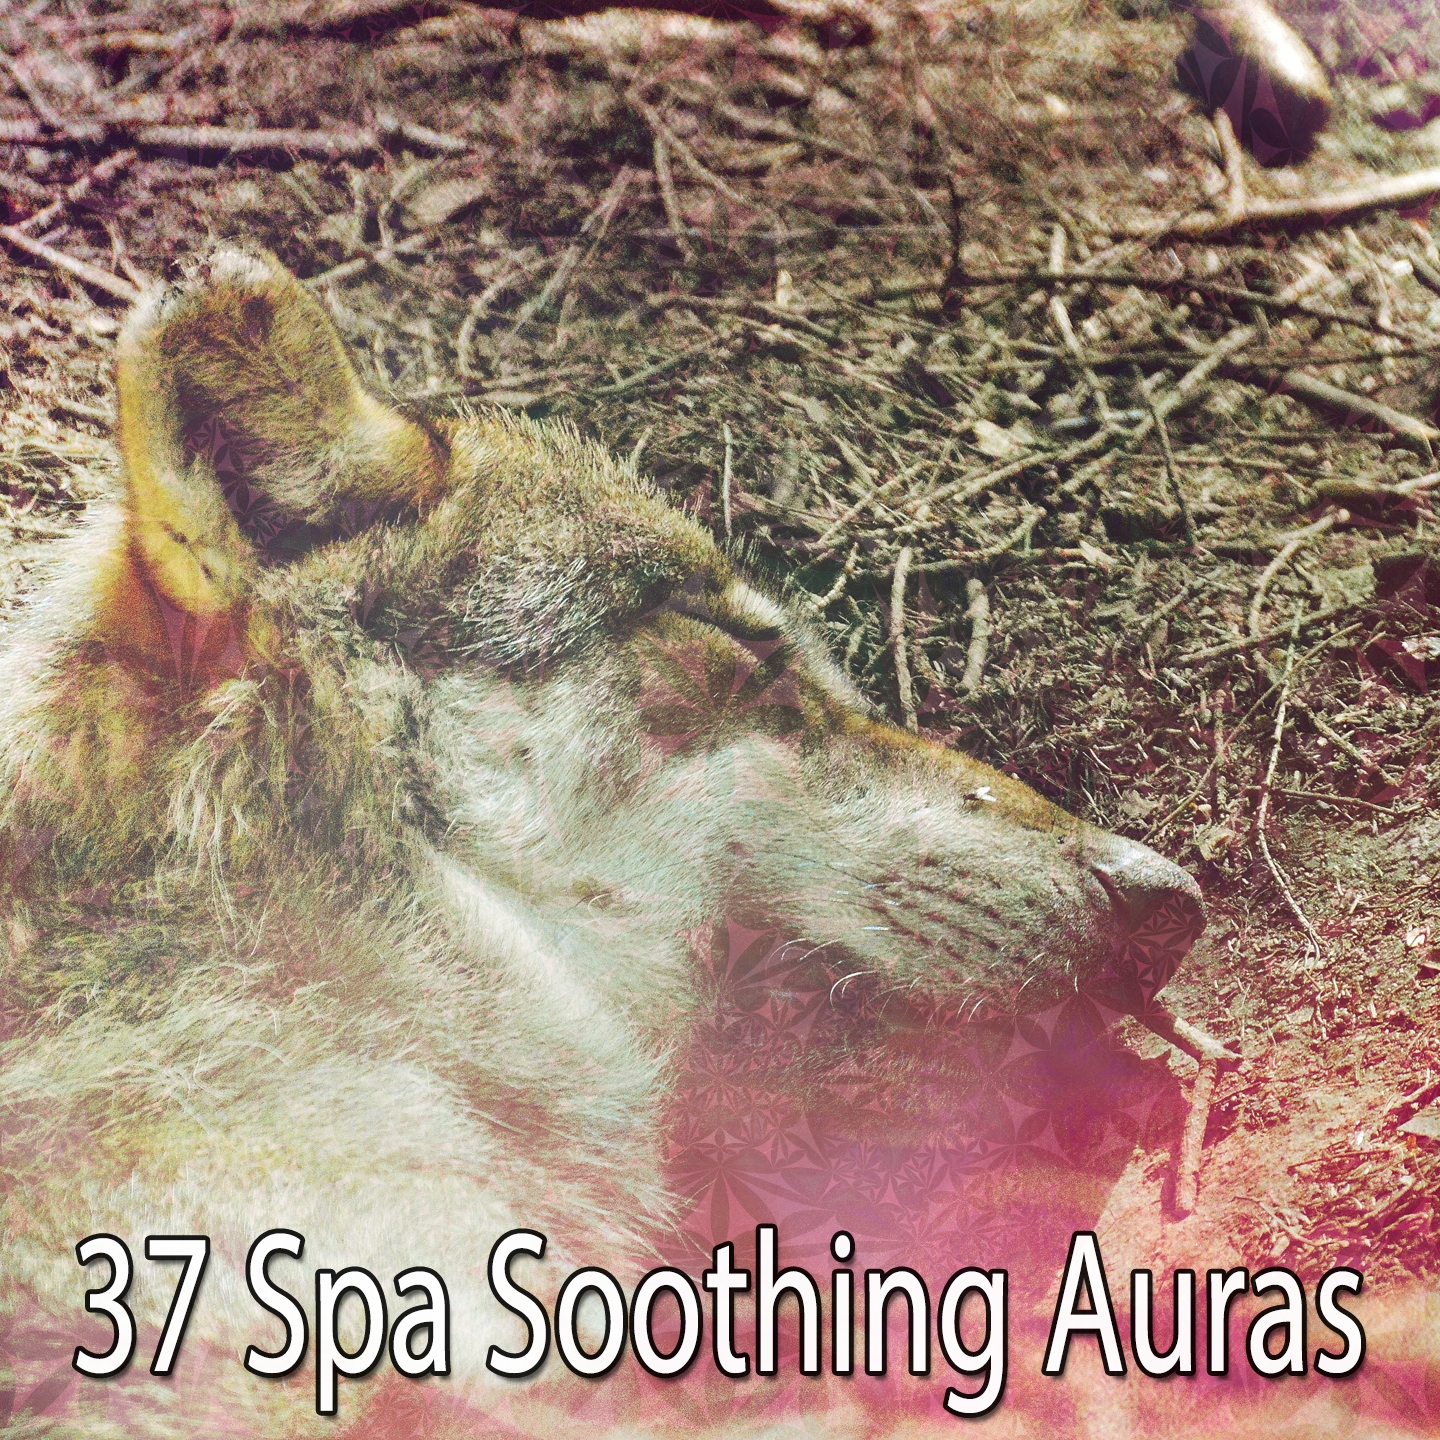 37 Spa Soothing Auras